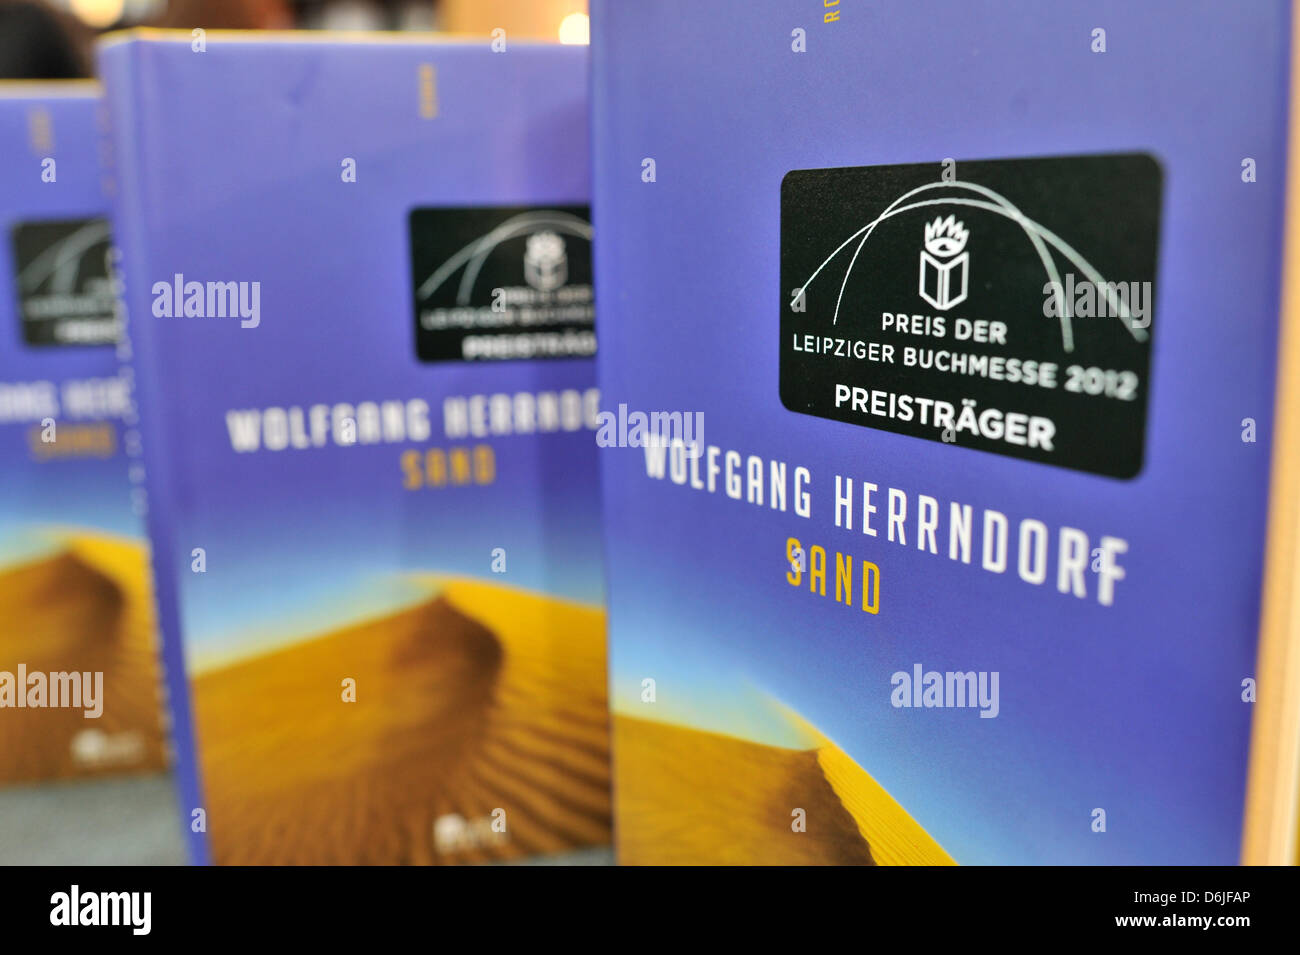 The novel 'Sand' by Wolfgang Herrndorf sits with the sticker '2012 Leipzig Book Fair Prize' at the stand of Rowolt at the Leipzig Book Fair in Leipzig, Germany, 16 March 2012. Herrndorf was awarded the prize at the start of the book fair on Thursday. Photo: HENDRIK SCHMIDT Stock Photo